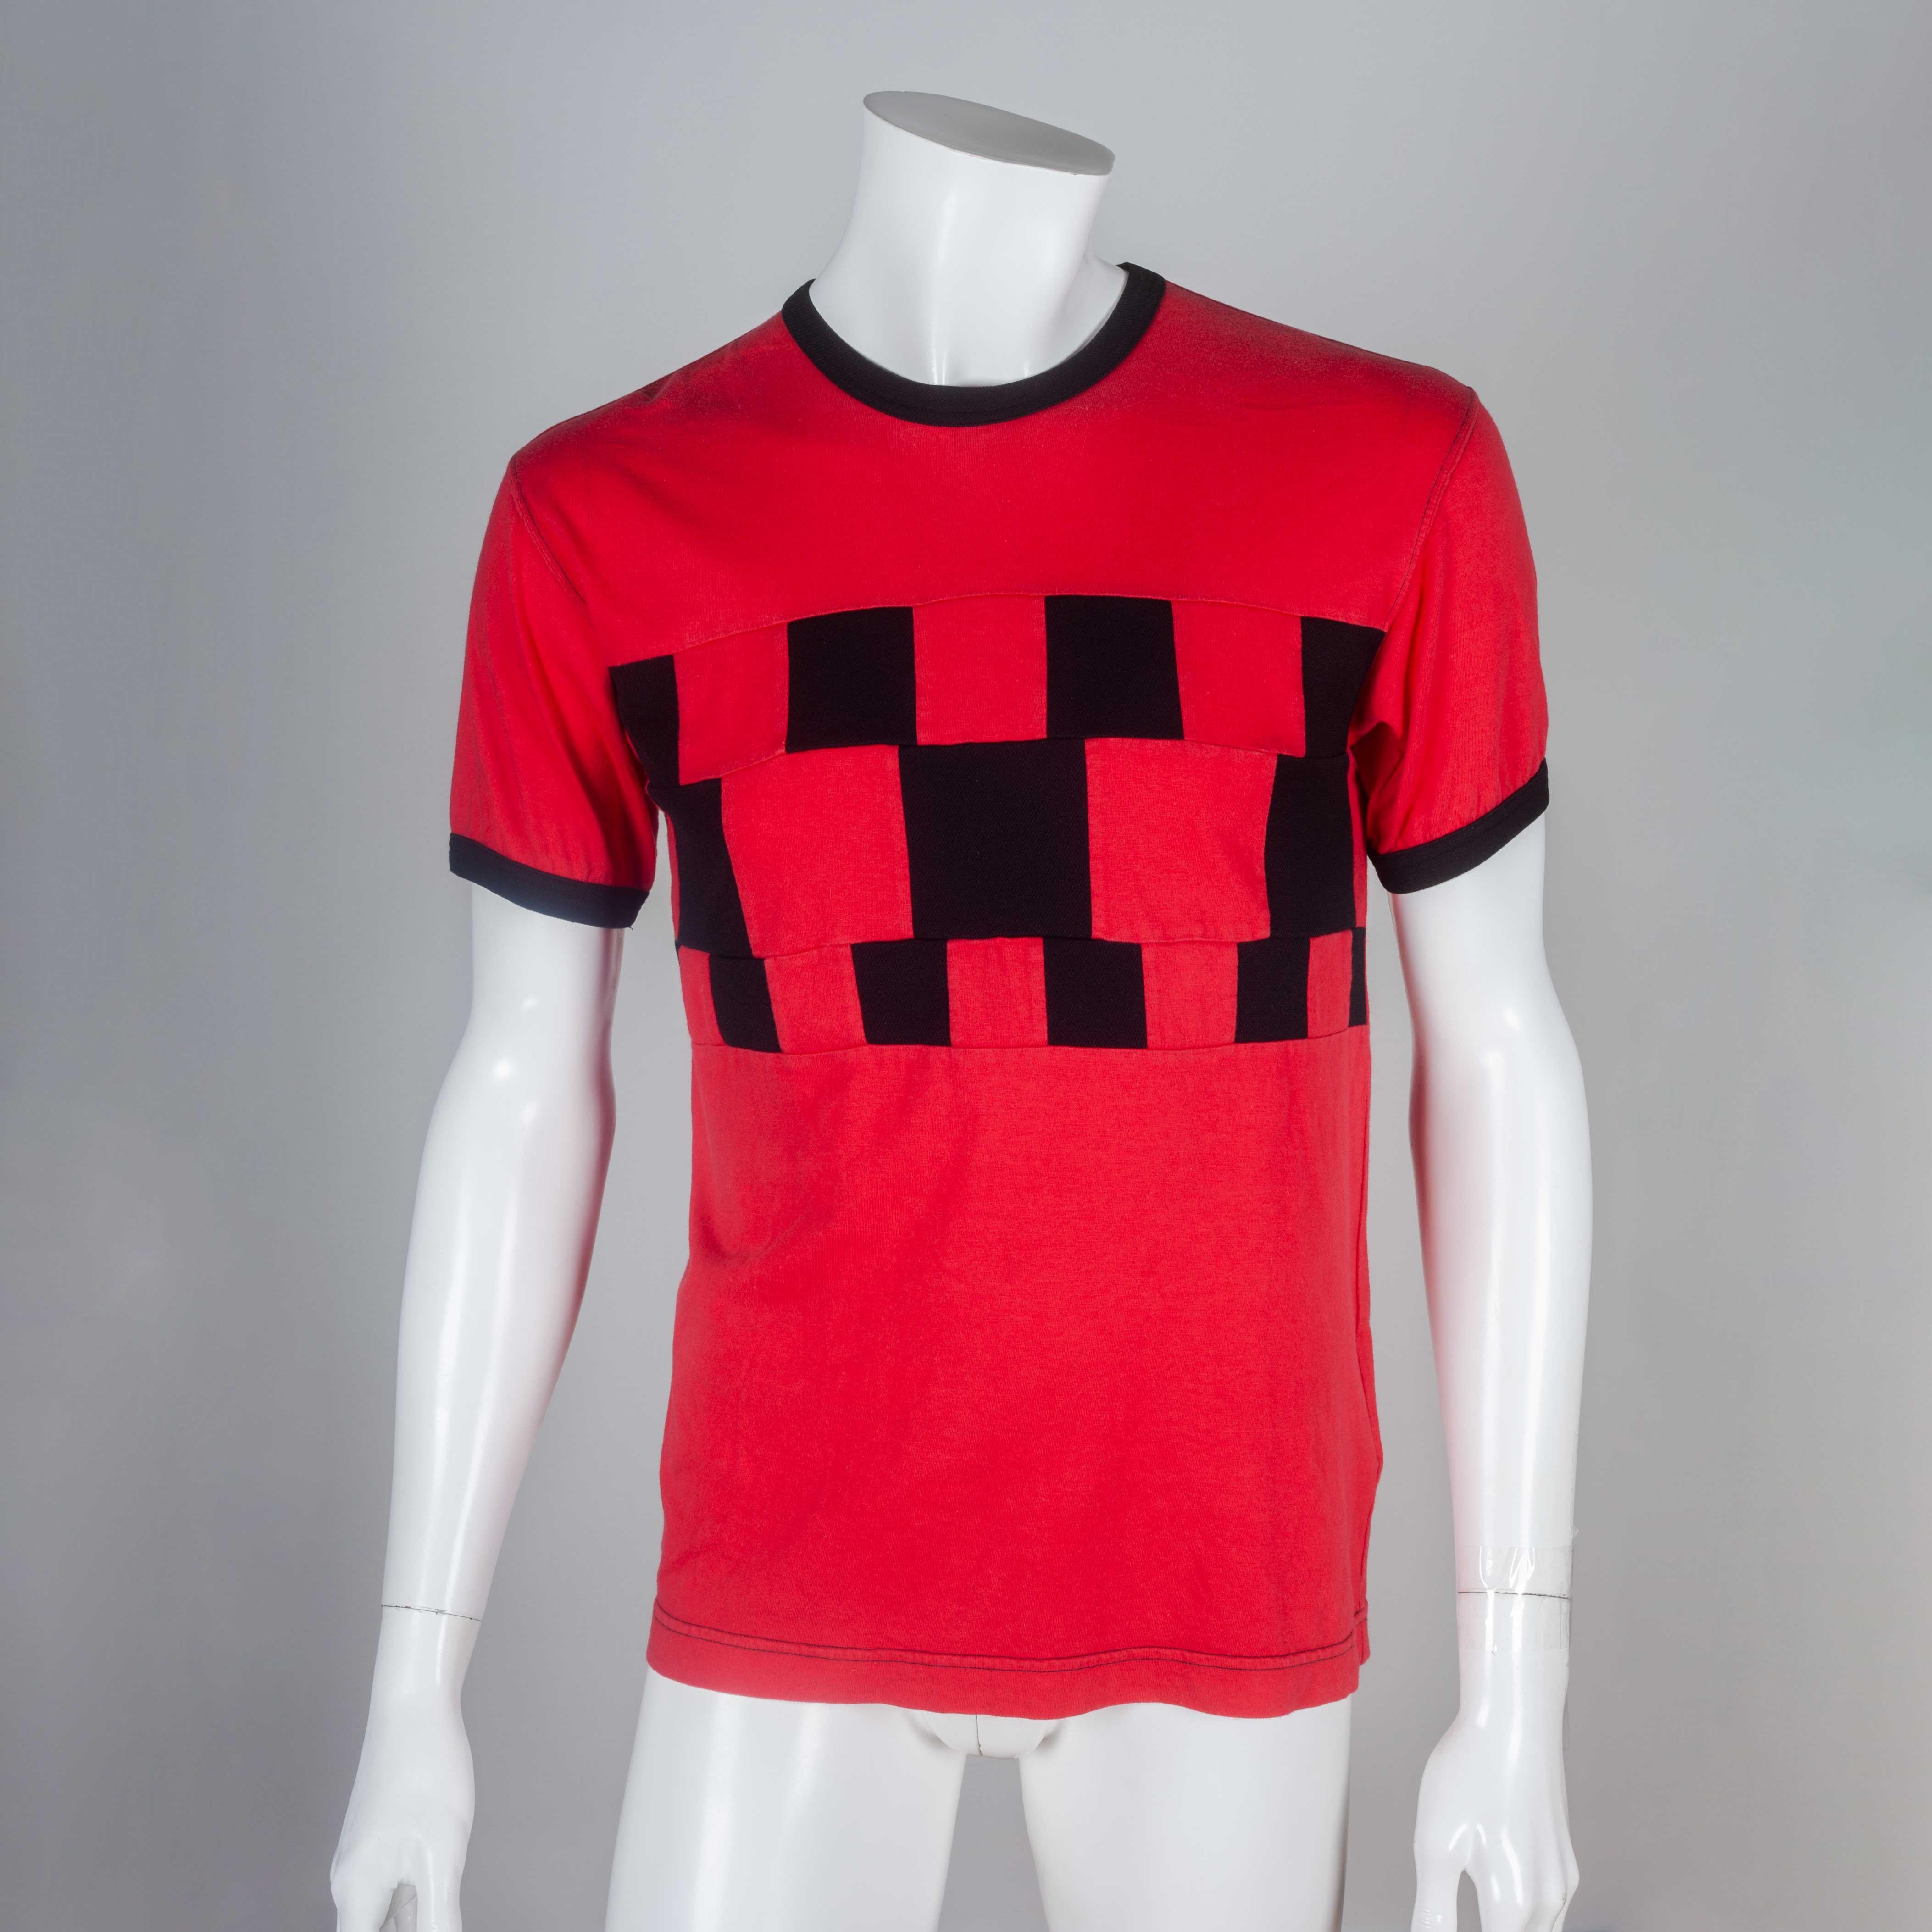 Comme des Garçons Homme Plus 2003 red short sleeve tee from Japan with black square patch pattern. Vintage grunge vibe pairs with the glitch and techno feel of this early aughts t-shirt. 

YEAR: 2003
MARKED SIZE: No size marked
US MEN'S: S/M
US